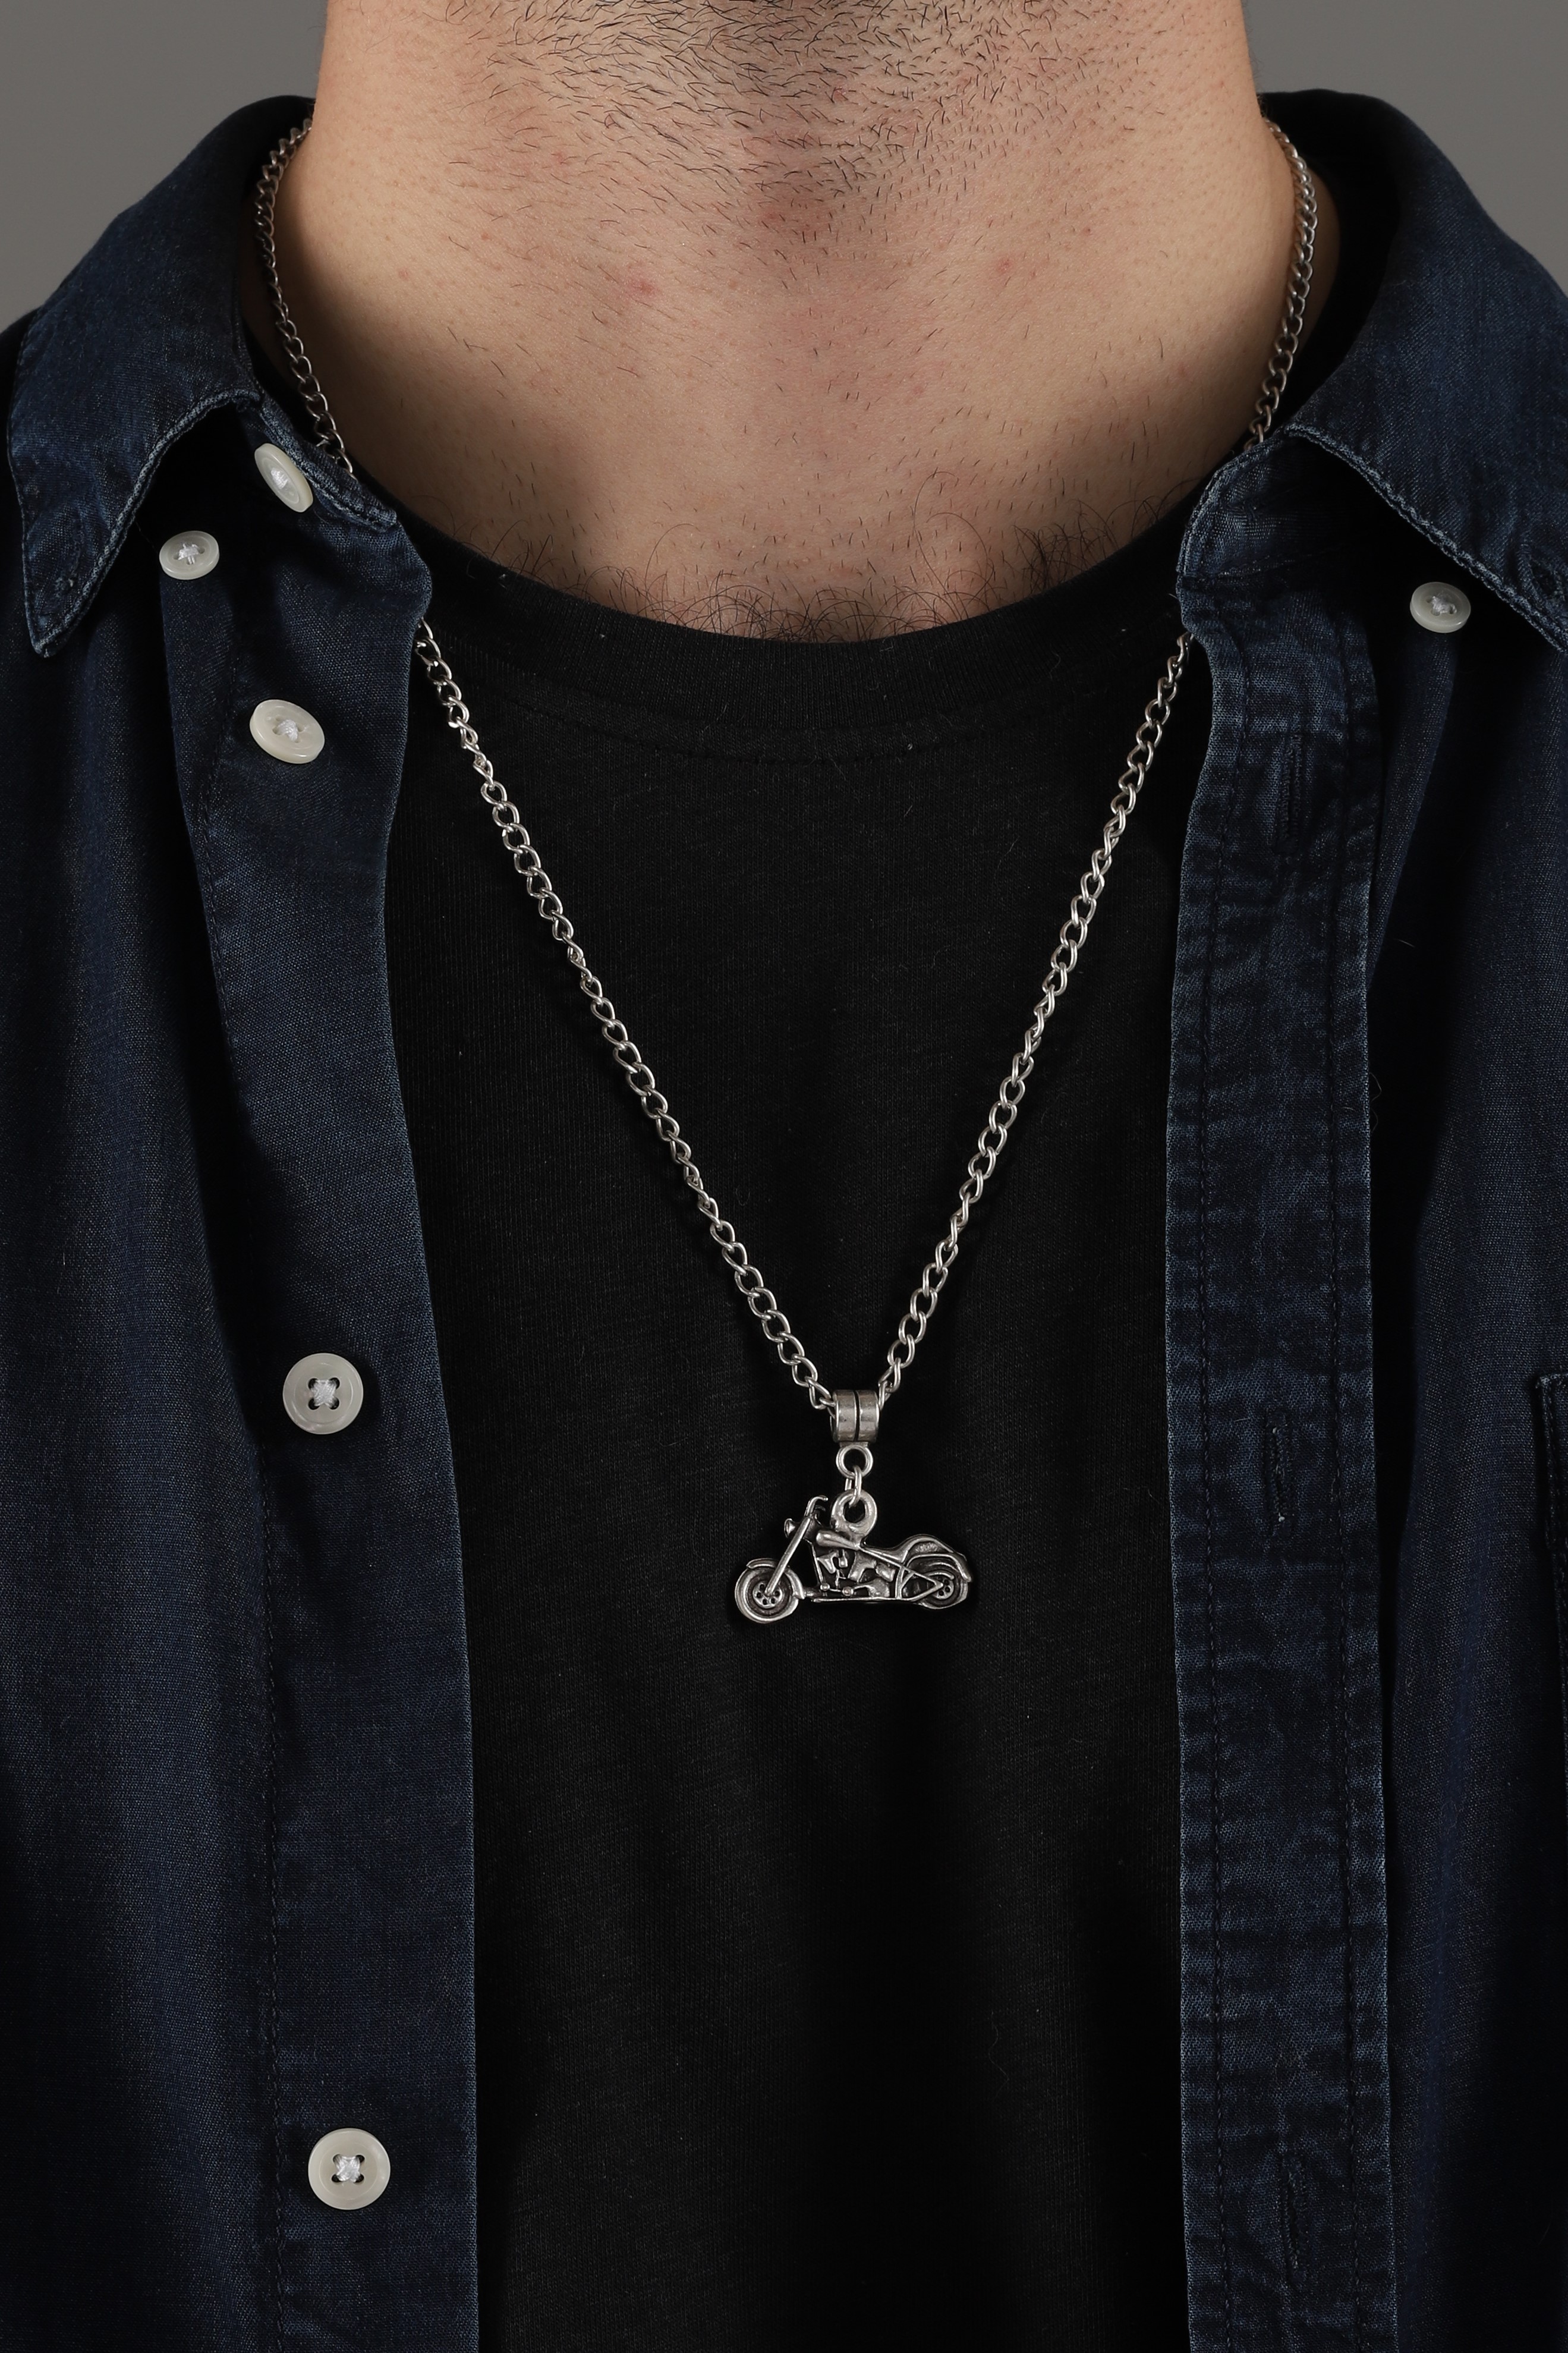 SILVER PLATED PENDANT MOTORCYCLE NECKLACE